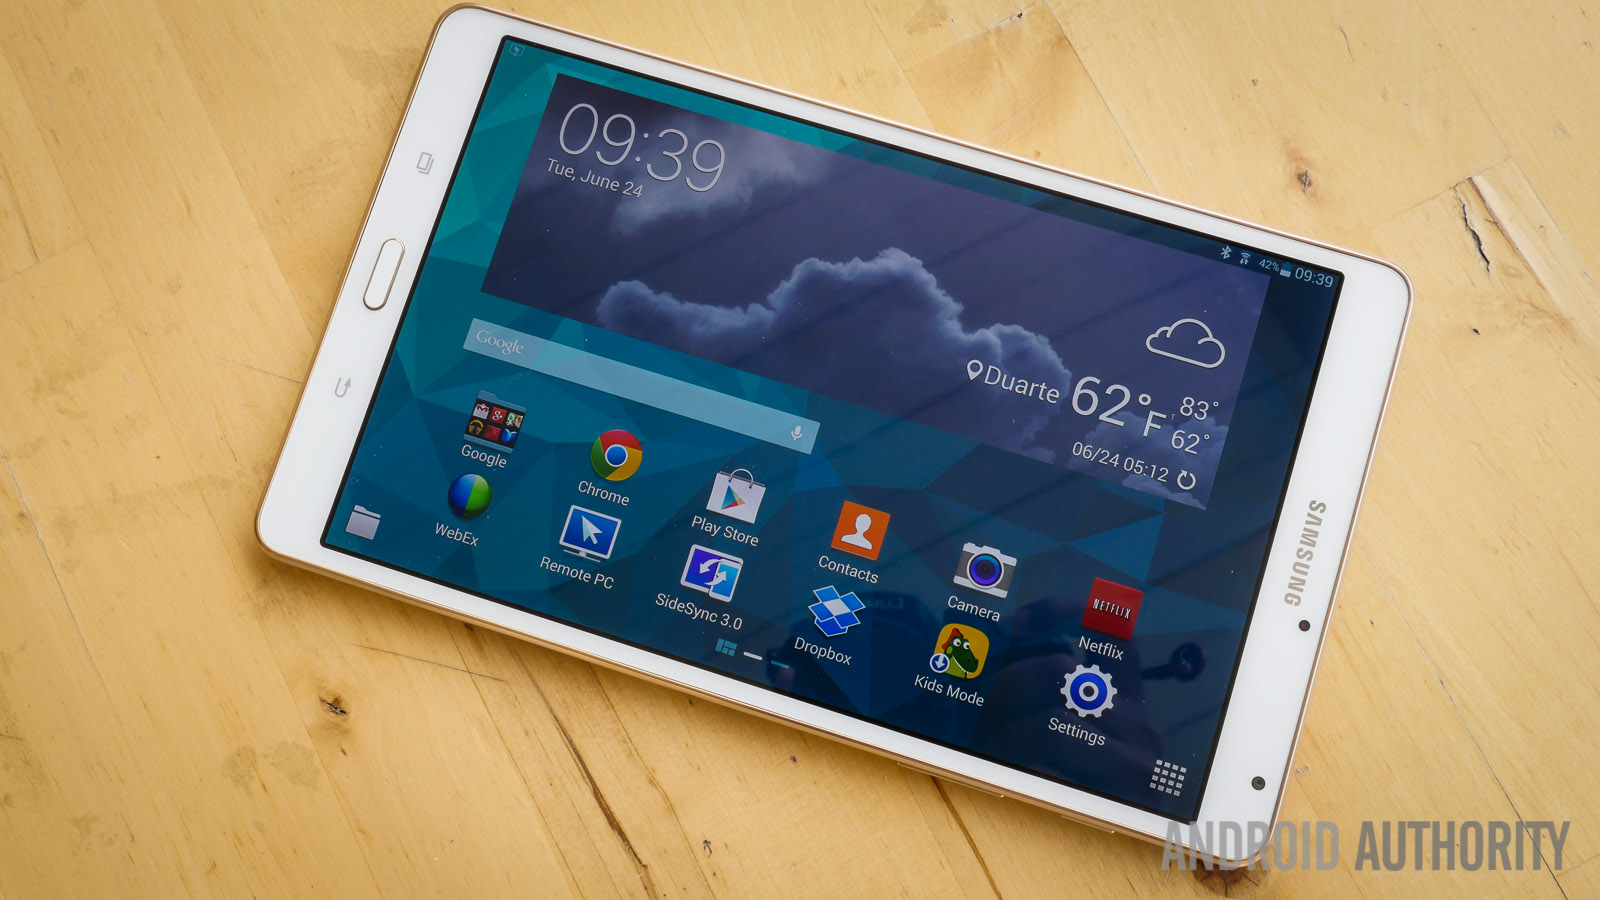 samsung-galaxy-tab-s-8.4-review-4-of-27